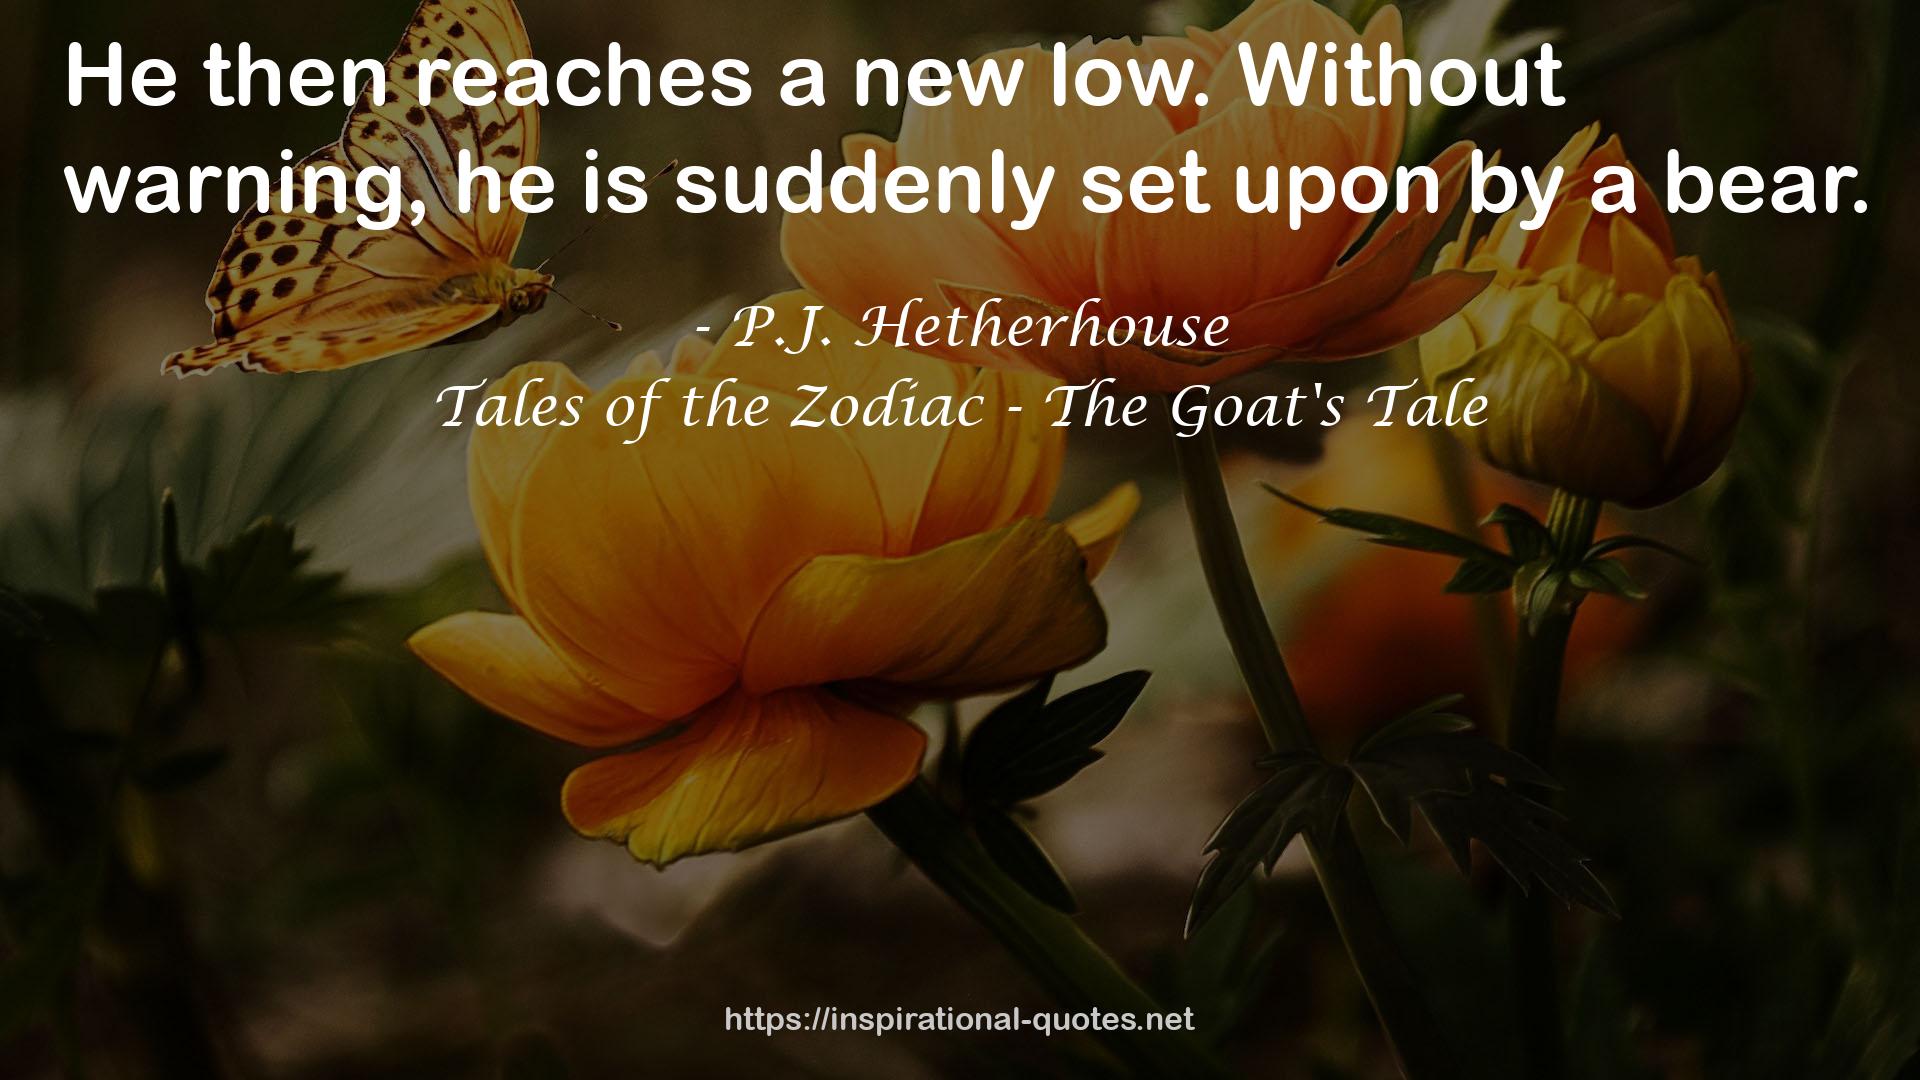 Tales of the Zodiac - The Goat's Tale QUOTES